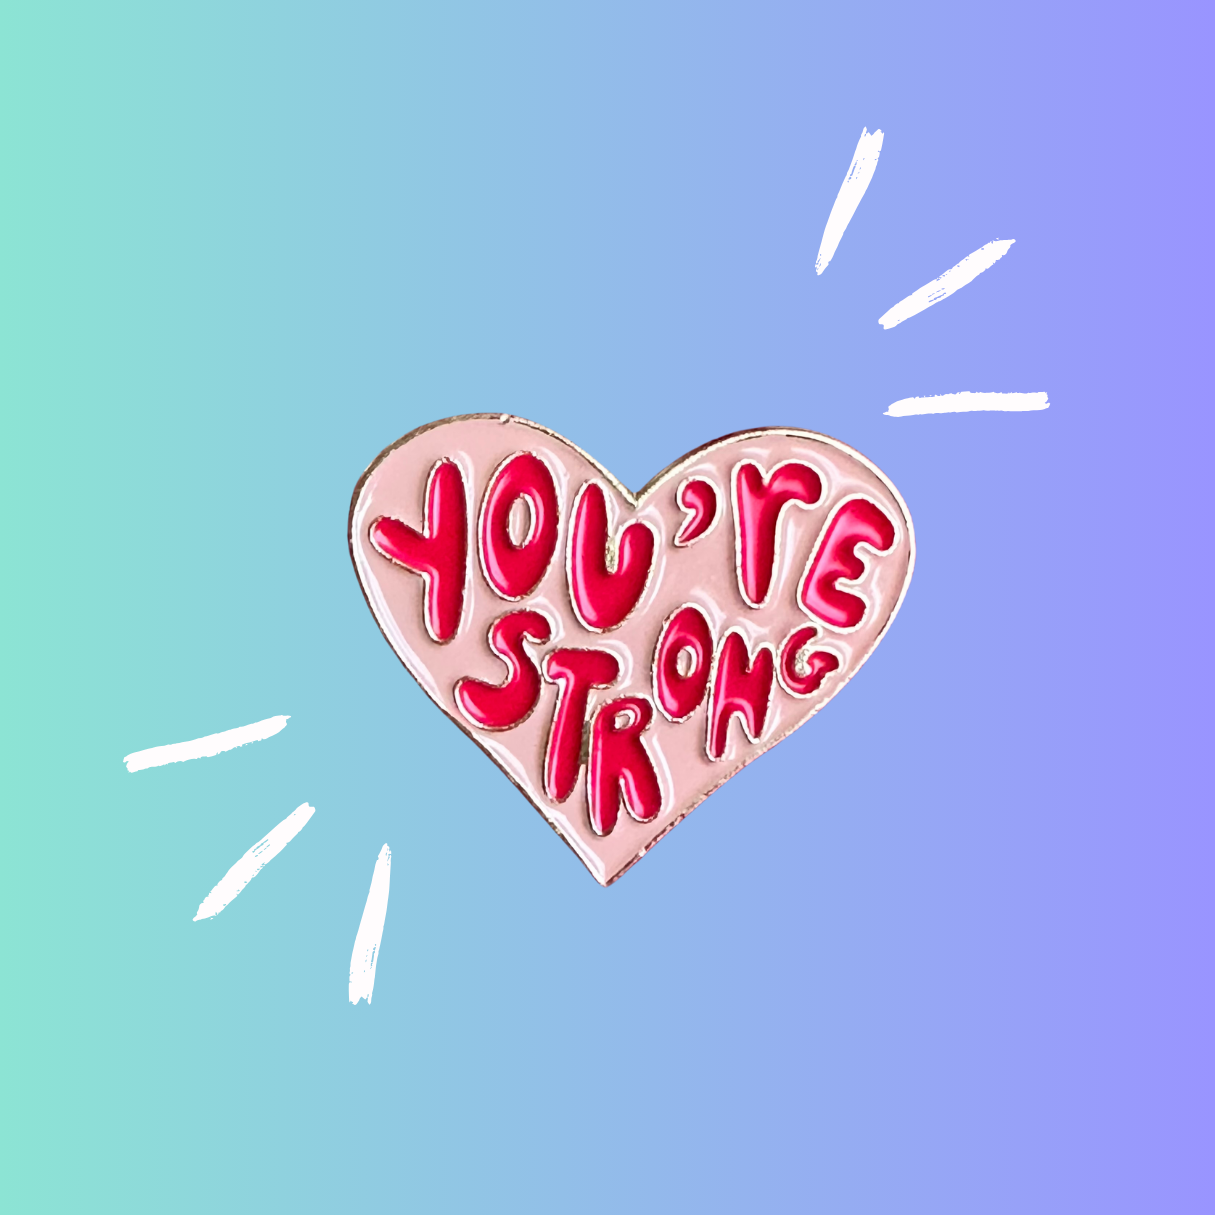 You Are Strong - Enamel Pin